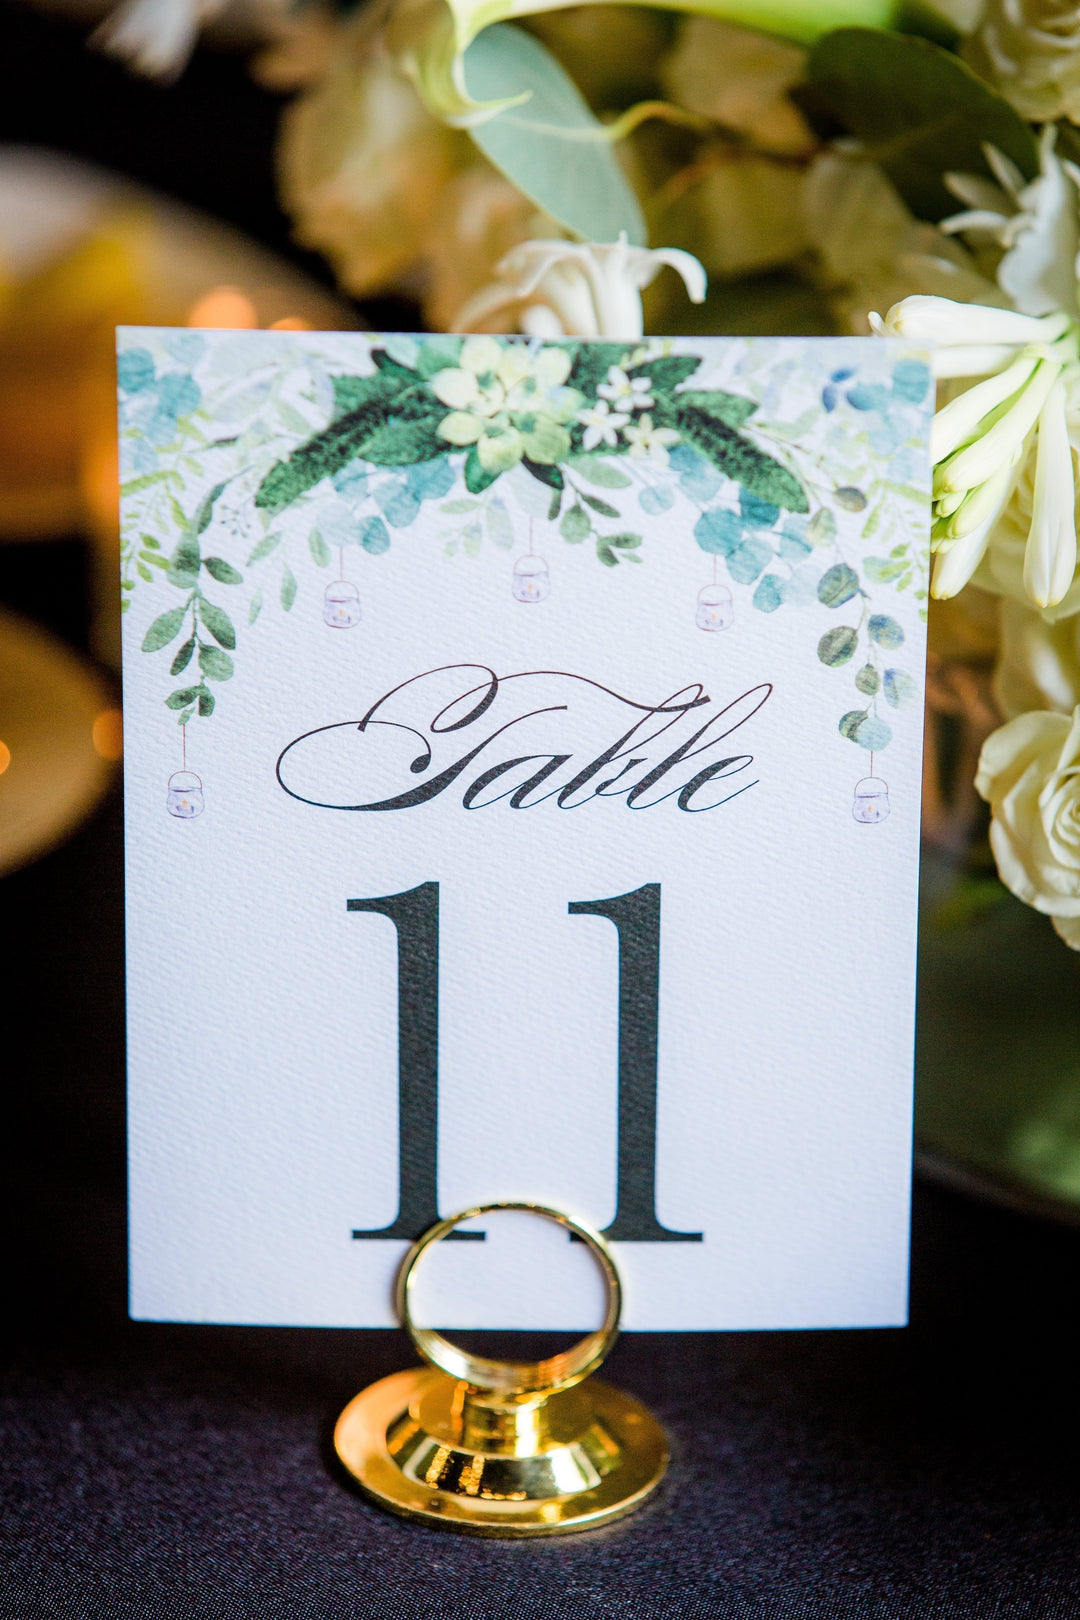 The Julie Table Number